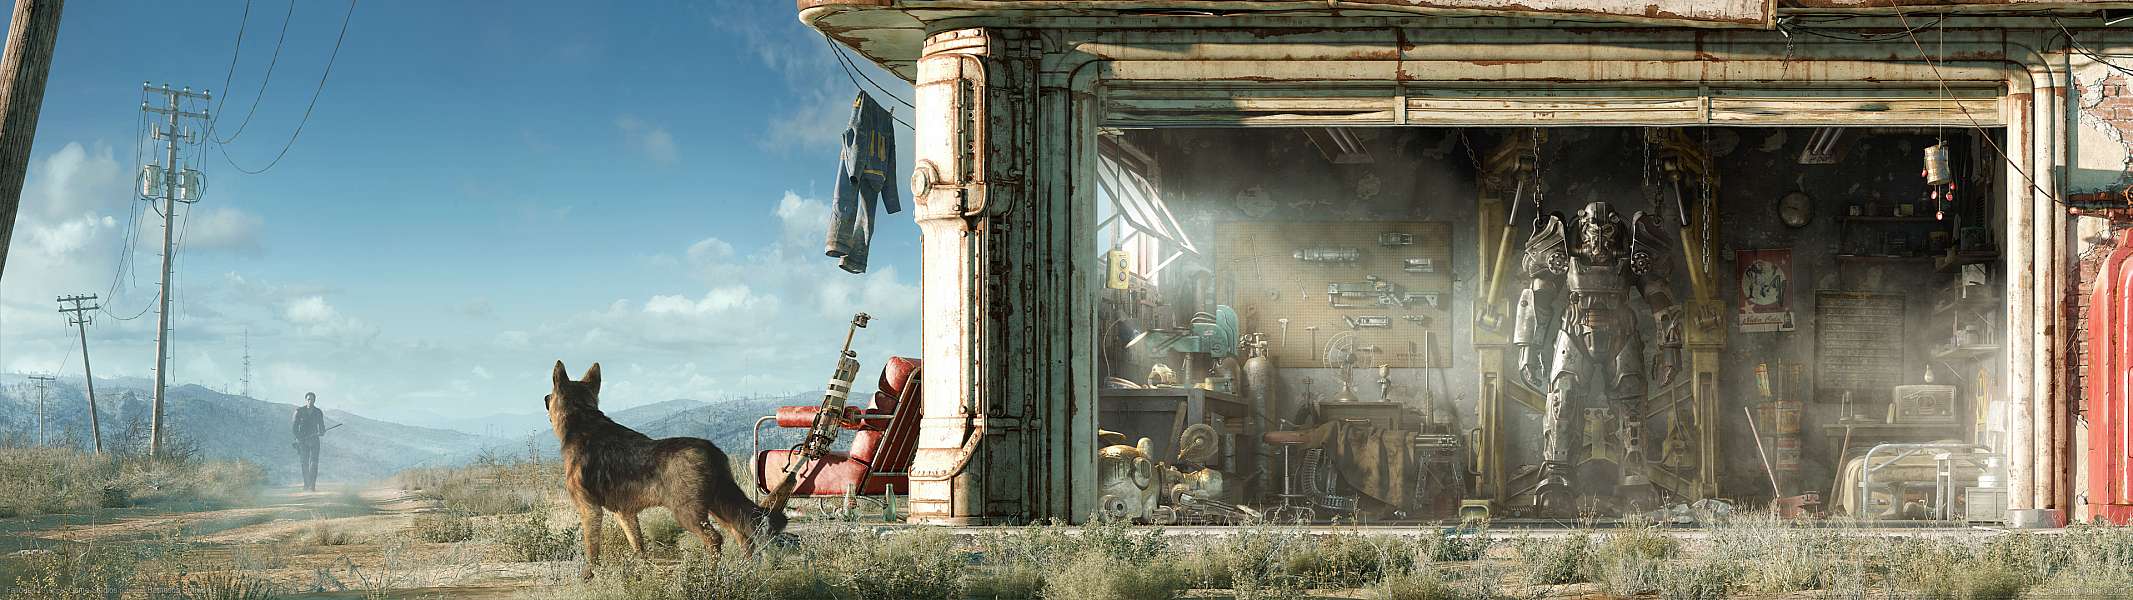 Fallout 4 dual screen wallpaper or background